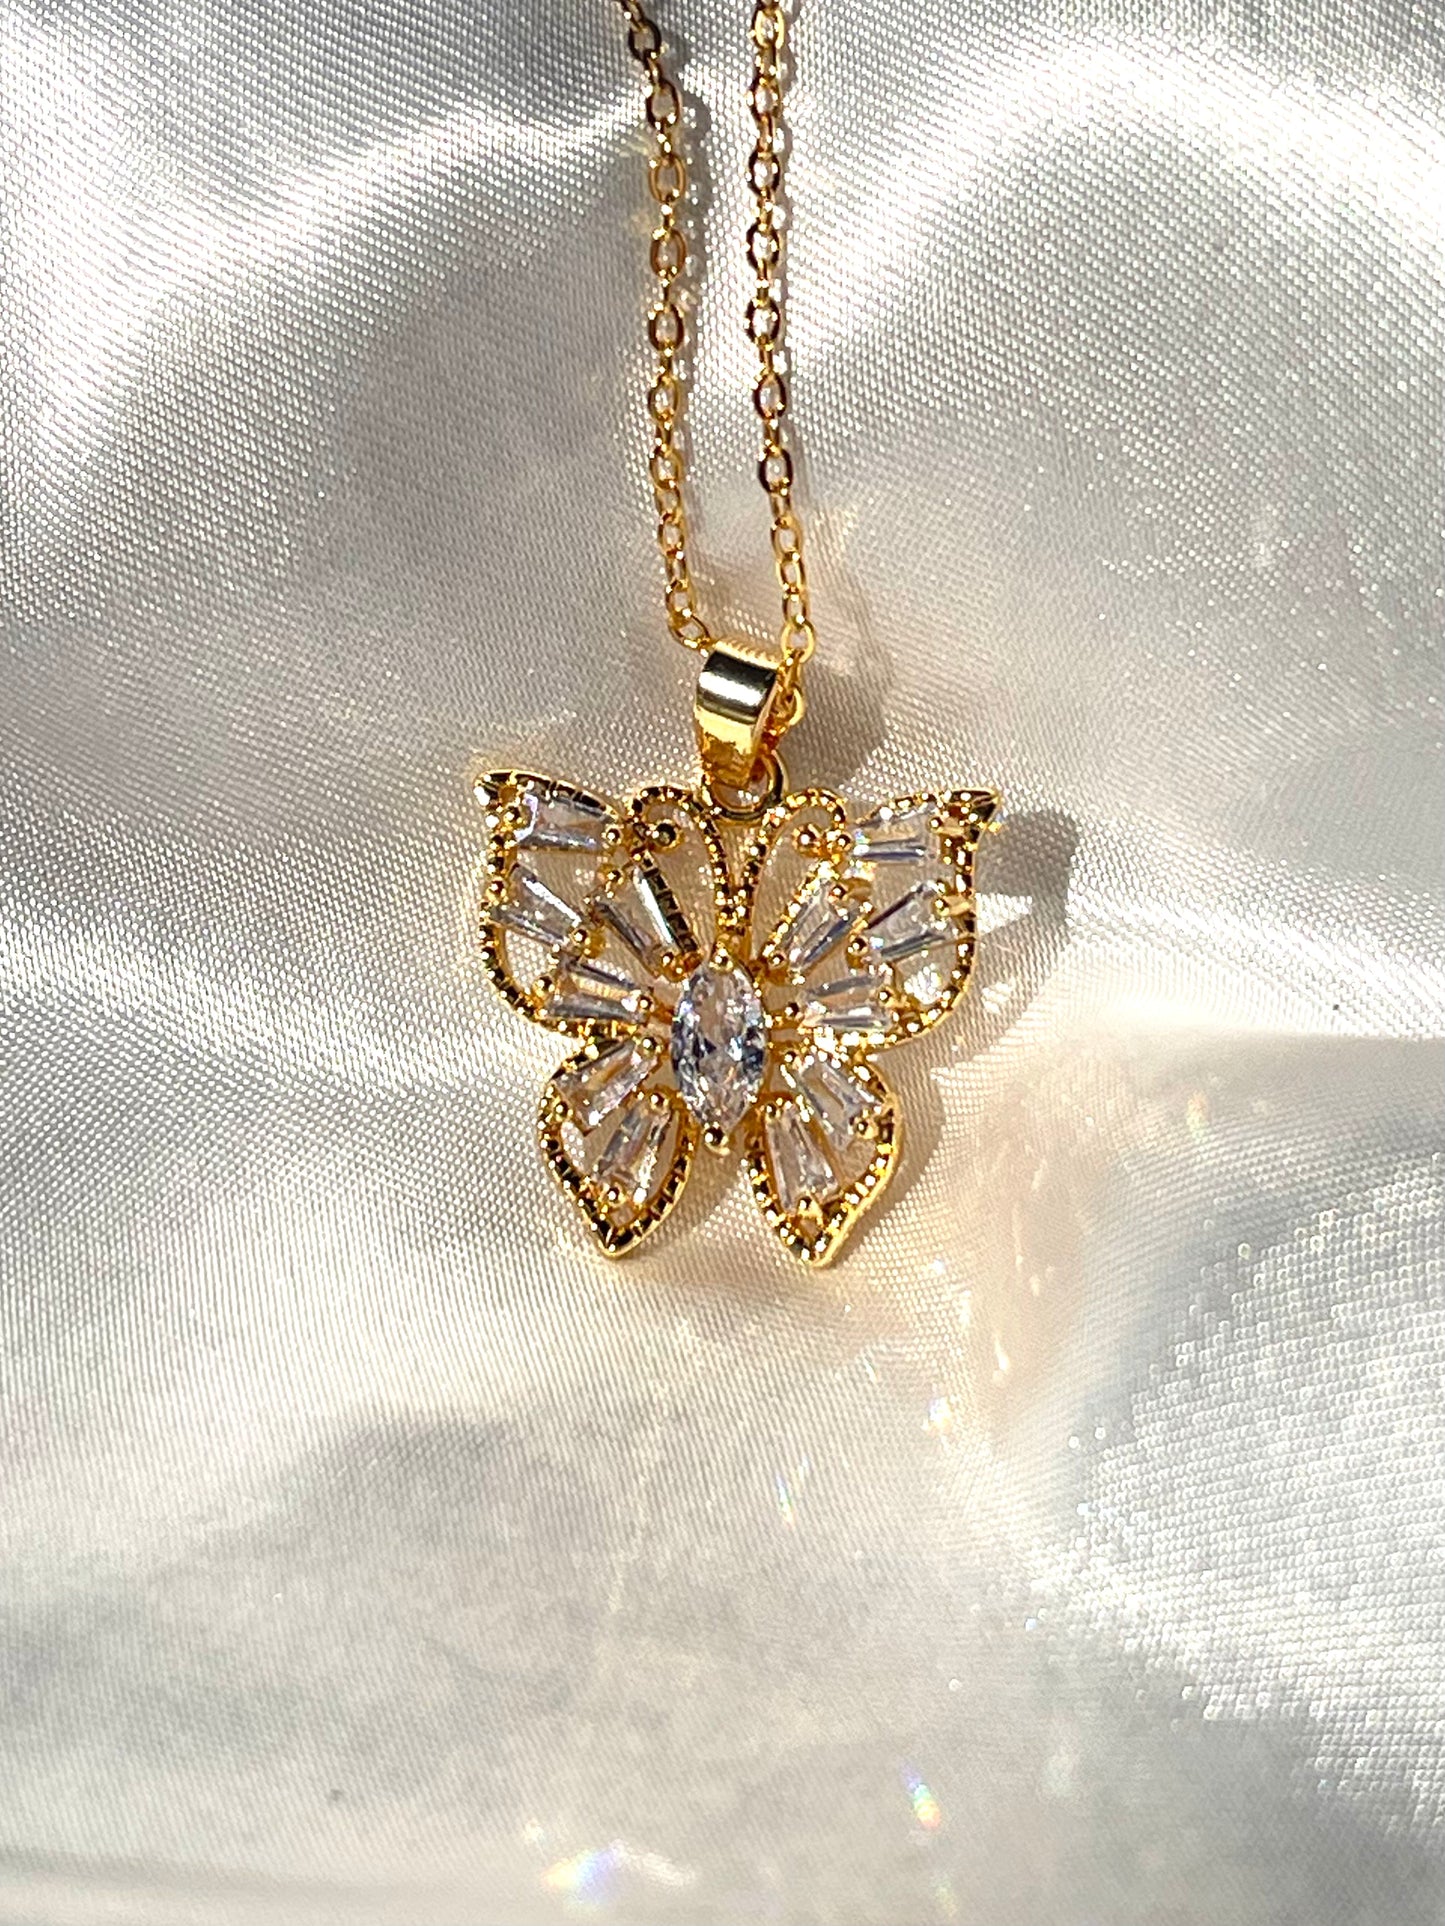 Pretty Butterfly Necklace